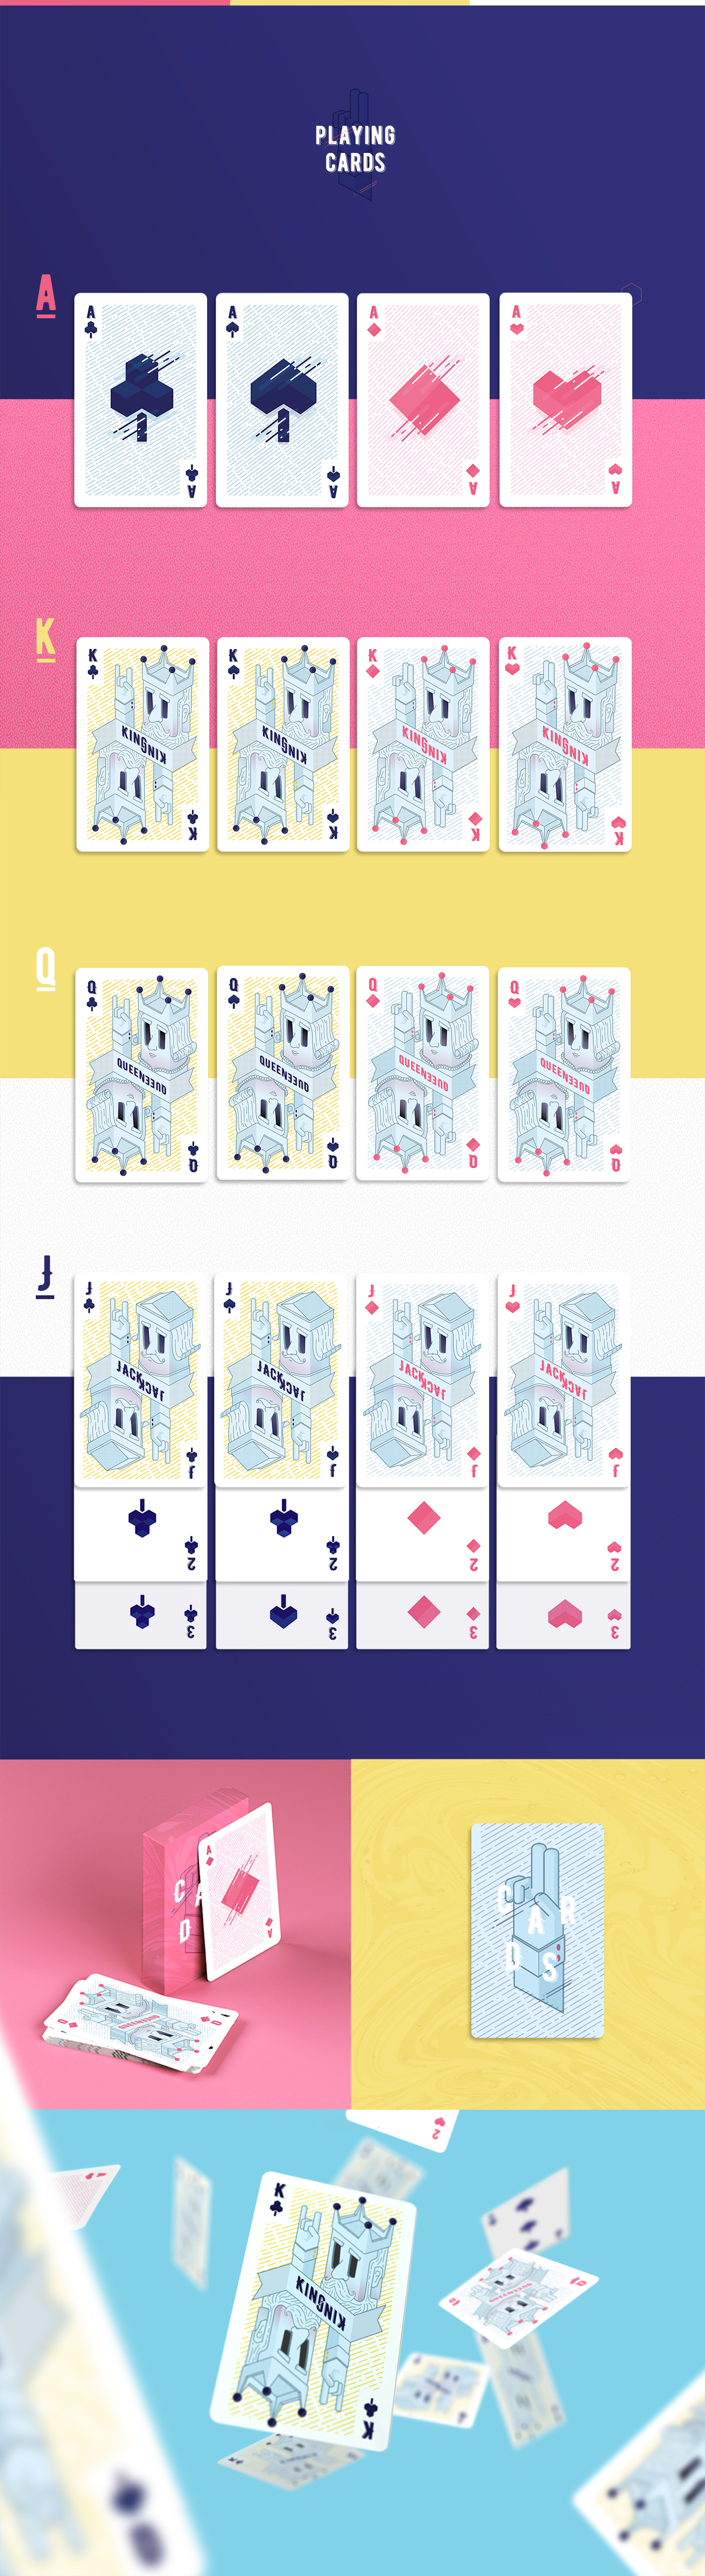 cards playing game Isometric king queen